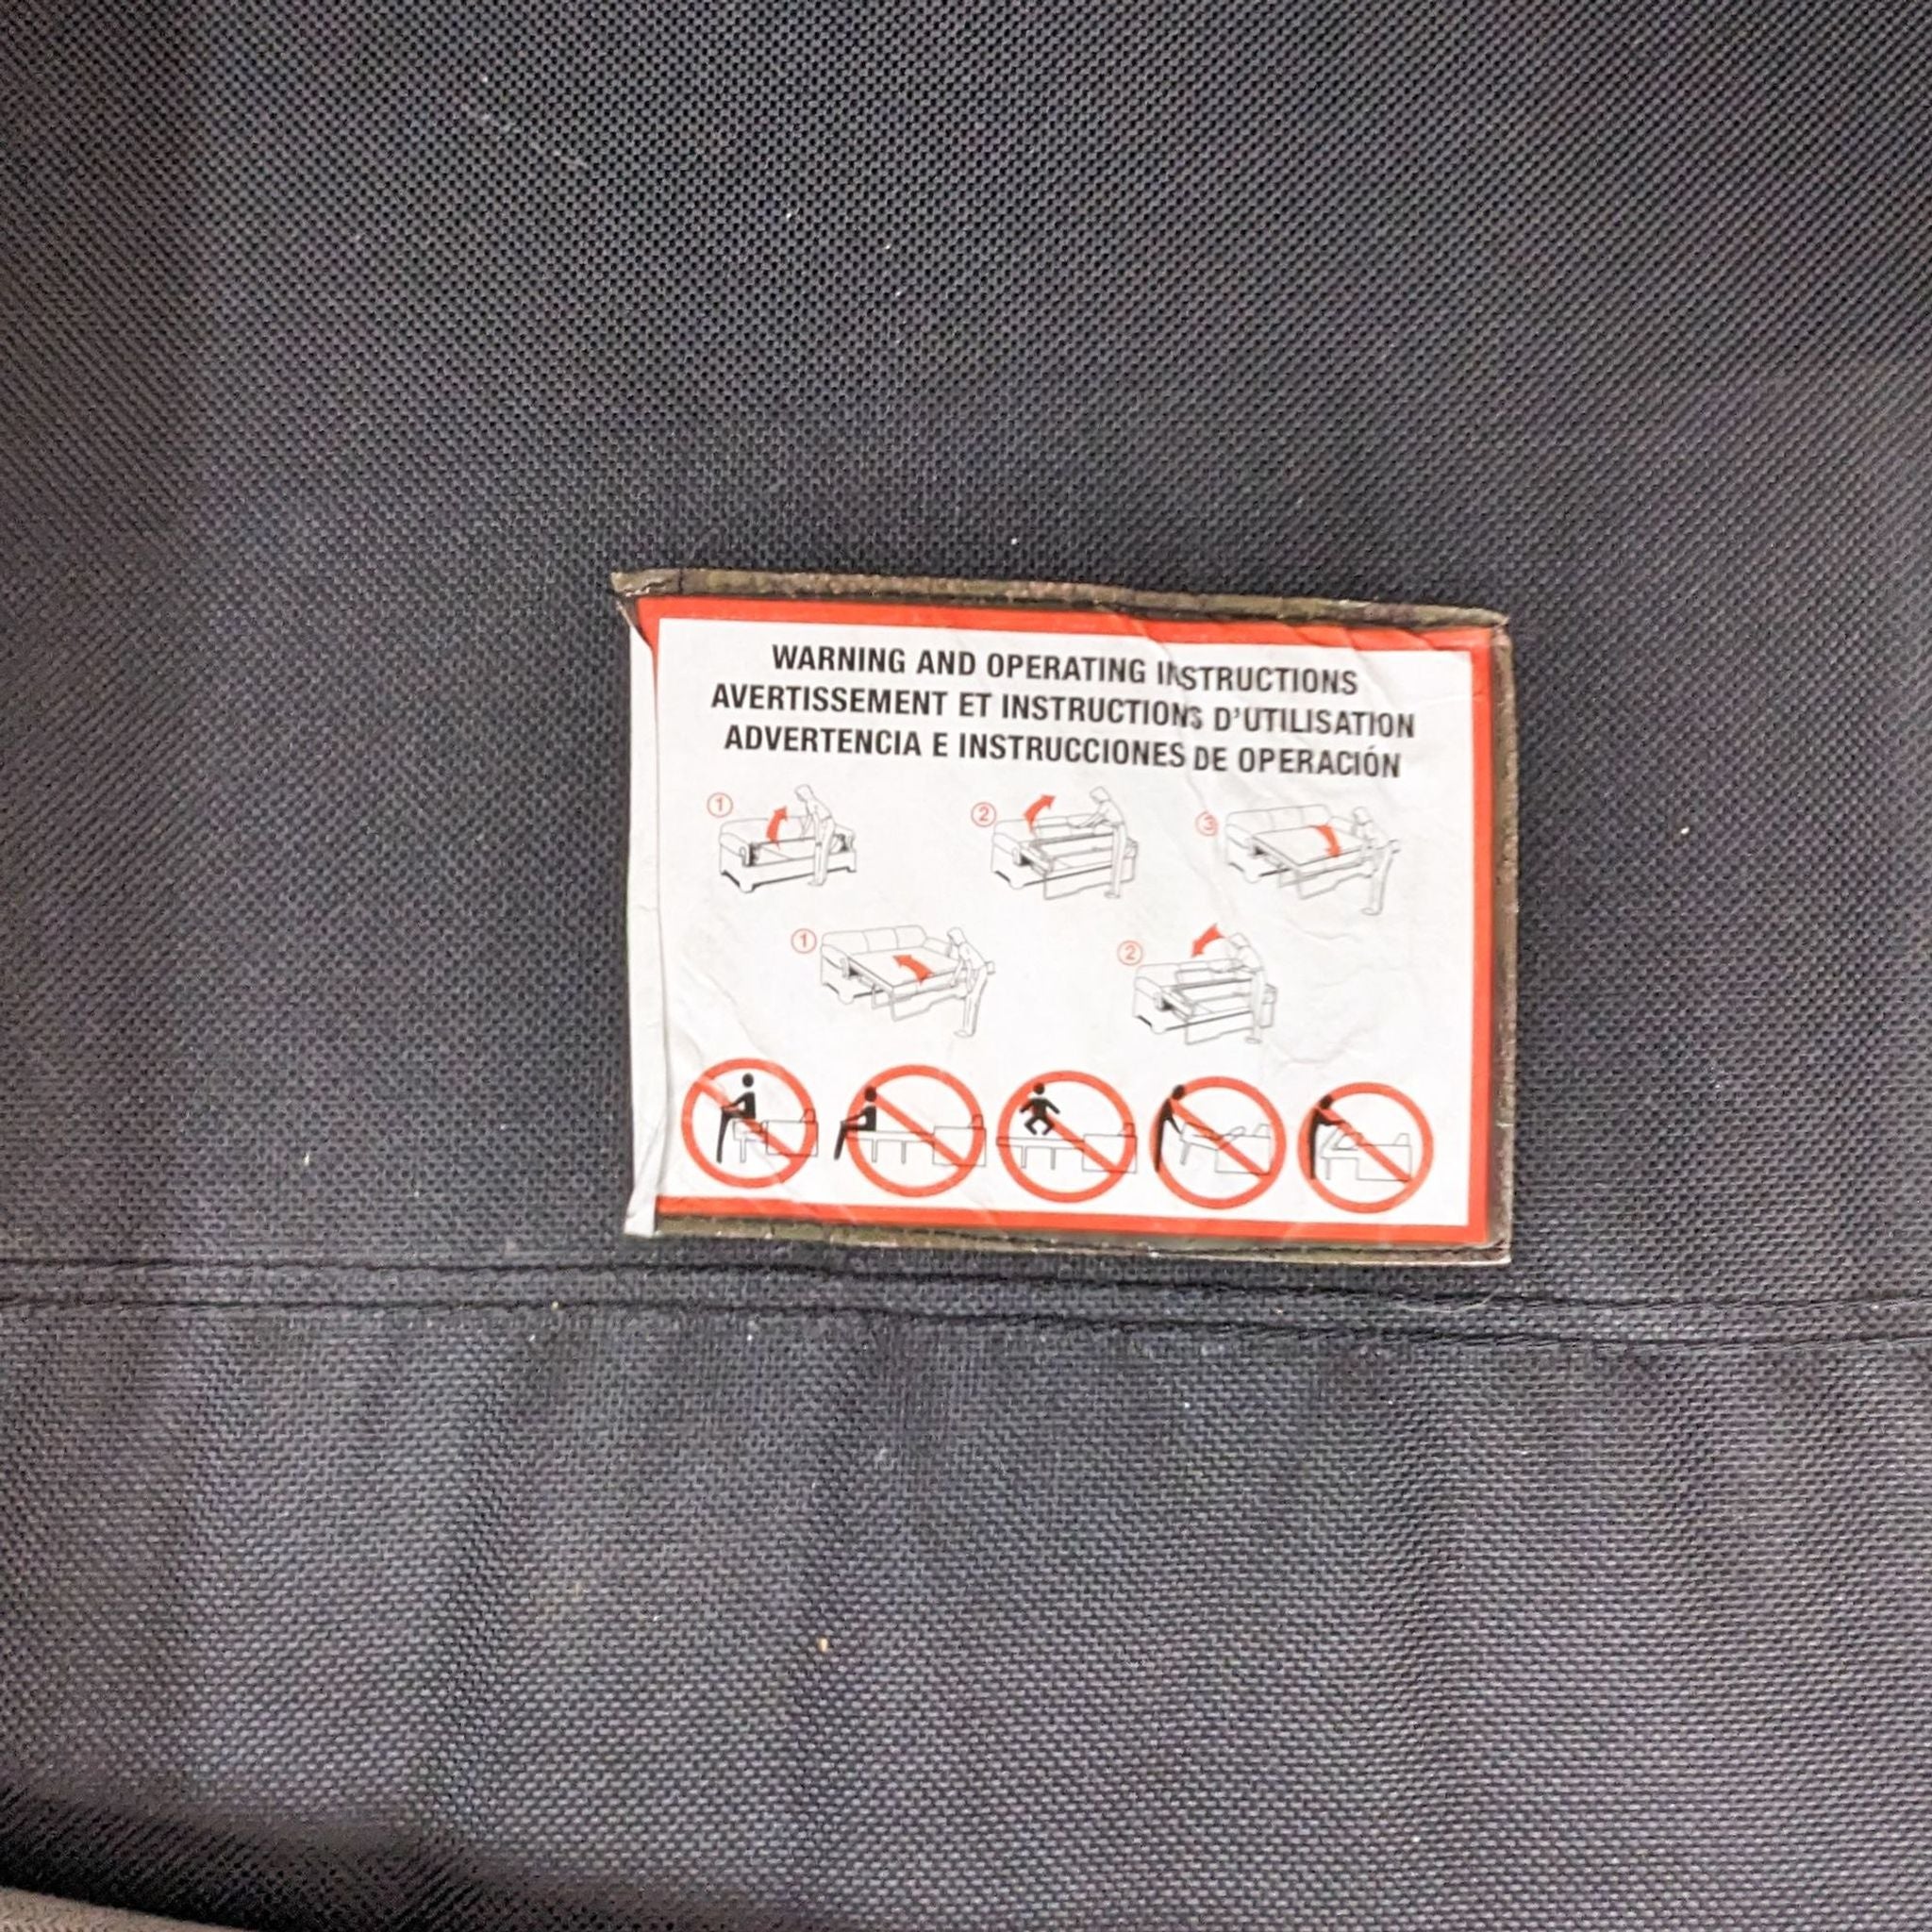 Alt text 3: "Close-up of a warning and operating instructions label on the Scandinavian Designs sectional with graphics depicting proper use."